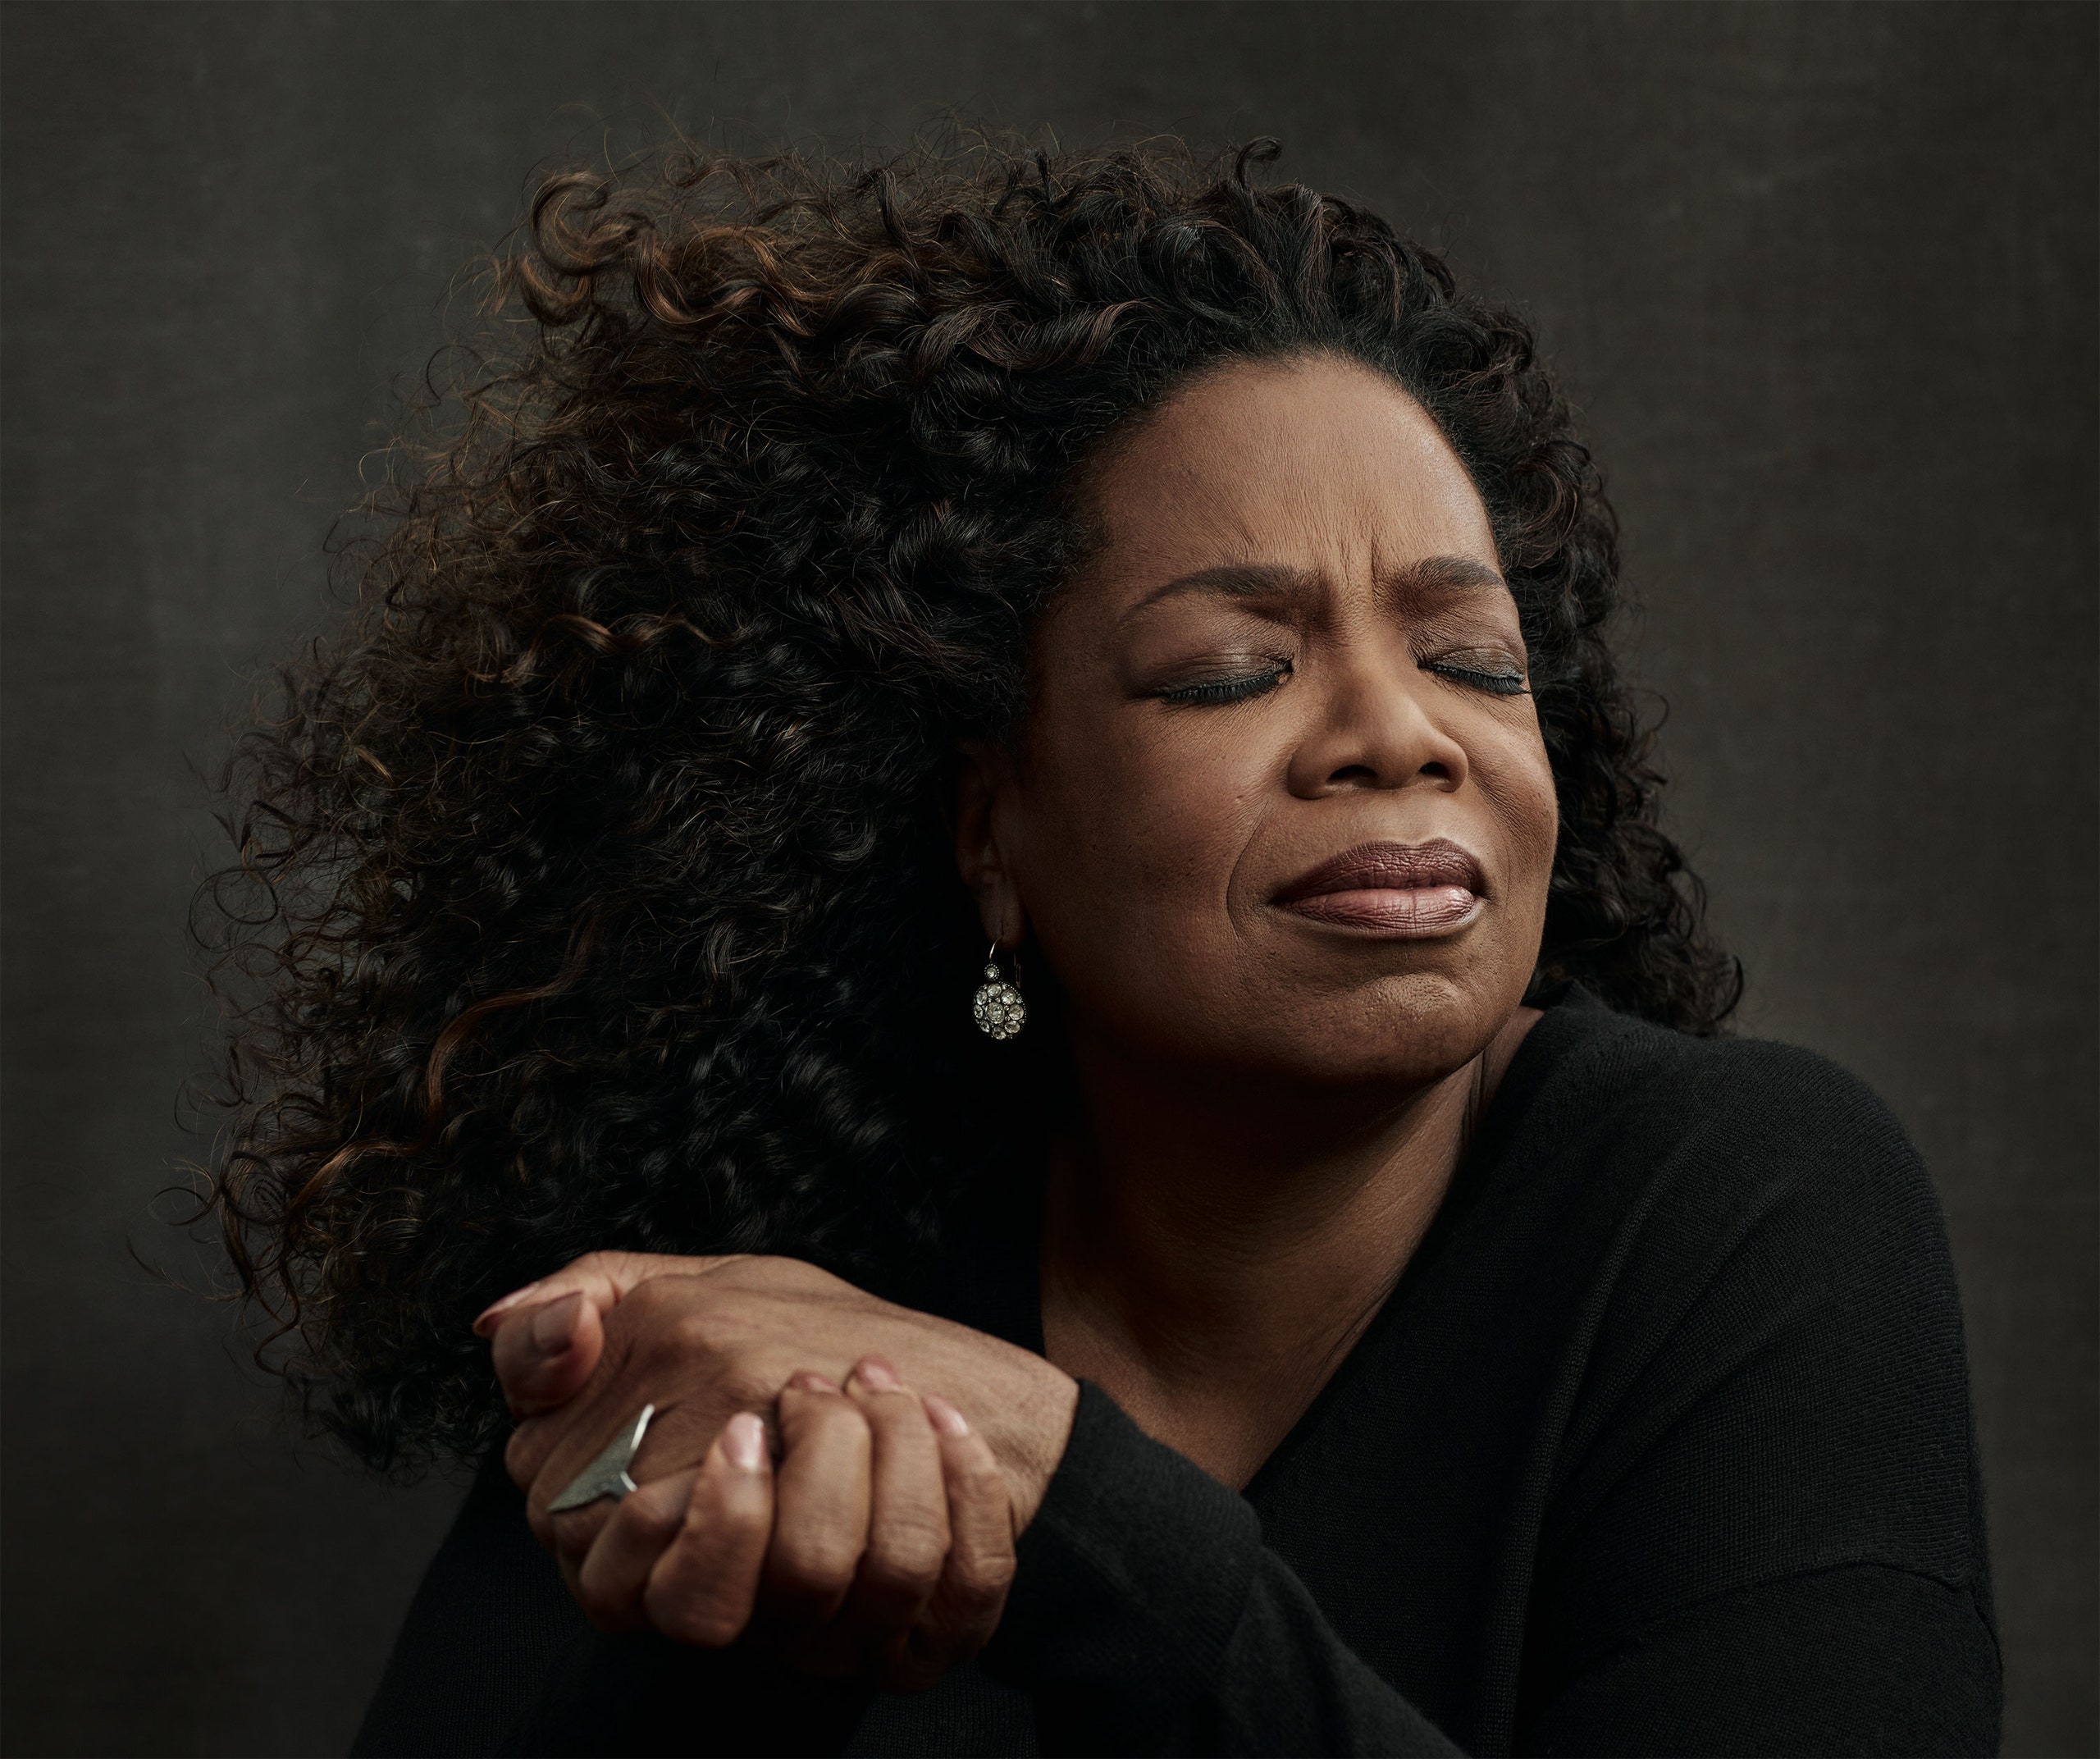 A Traumatic Childhood Riddled with Abuse from Relatives Shaped Oprah Winfrey’s Path to Success